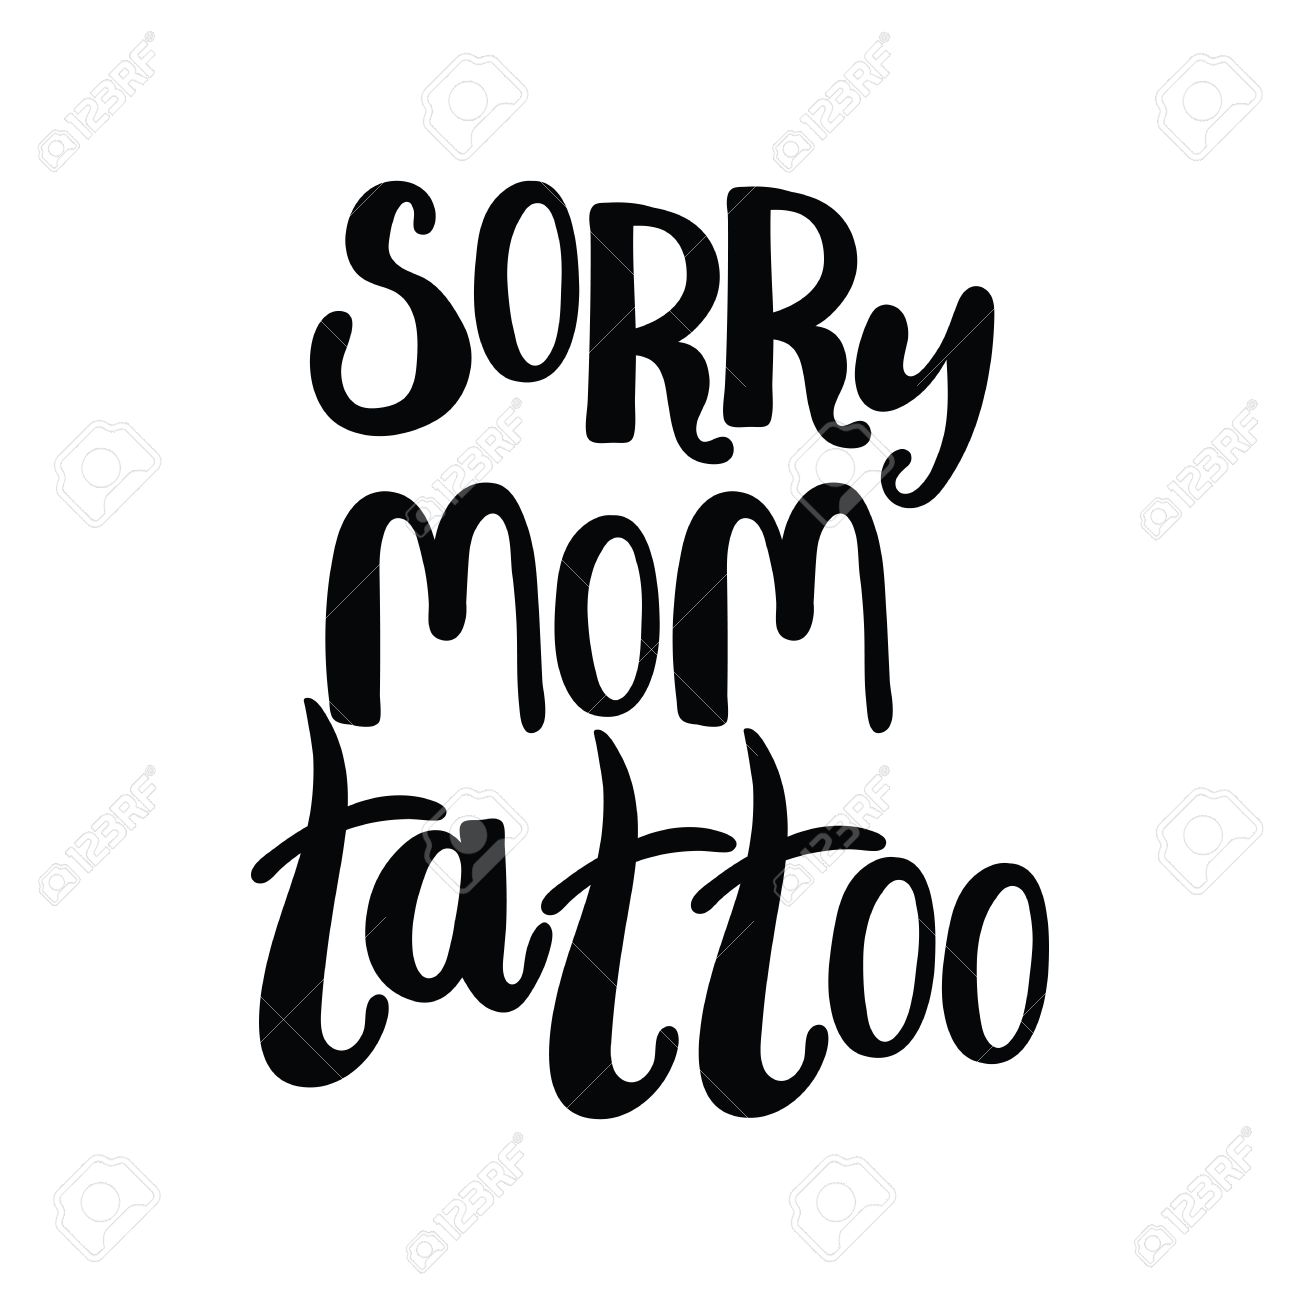 Sorry Mom Tattoo Lettering Isolated Object On White Background